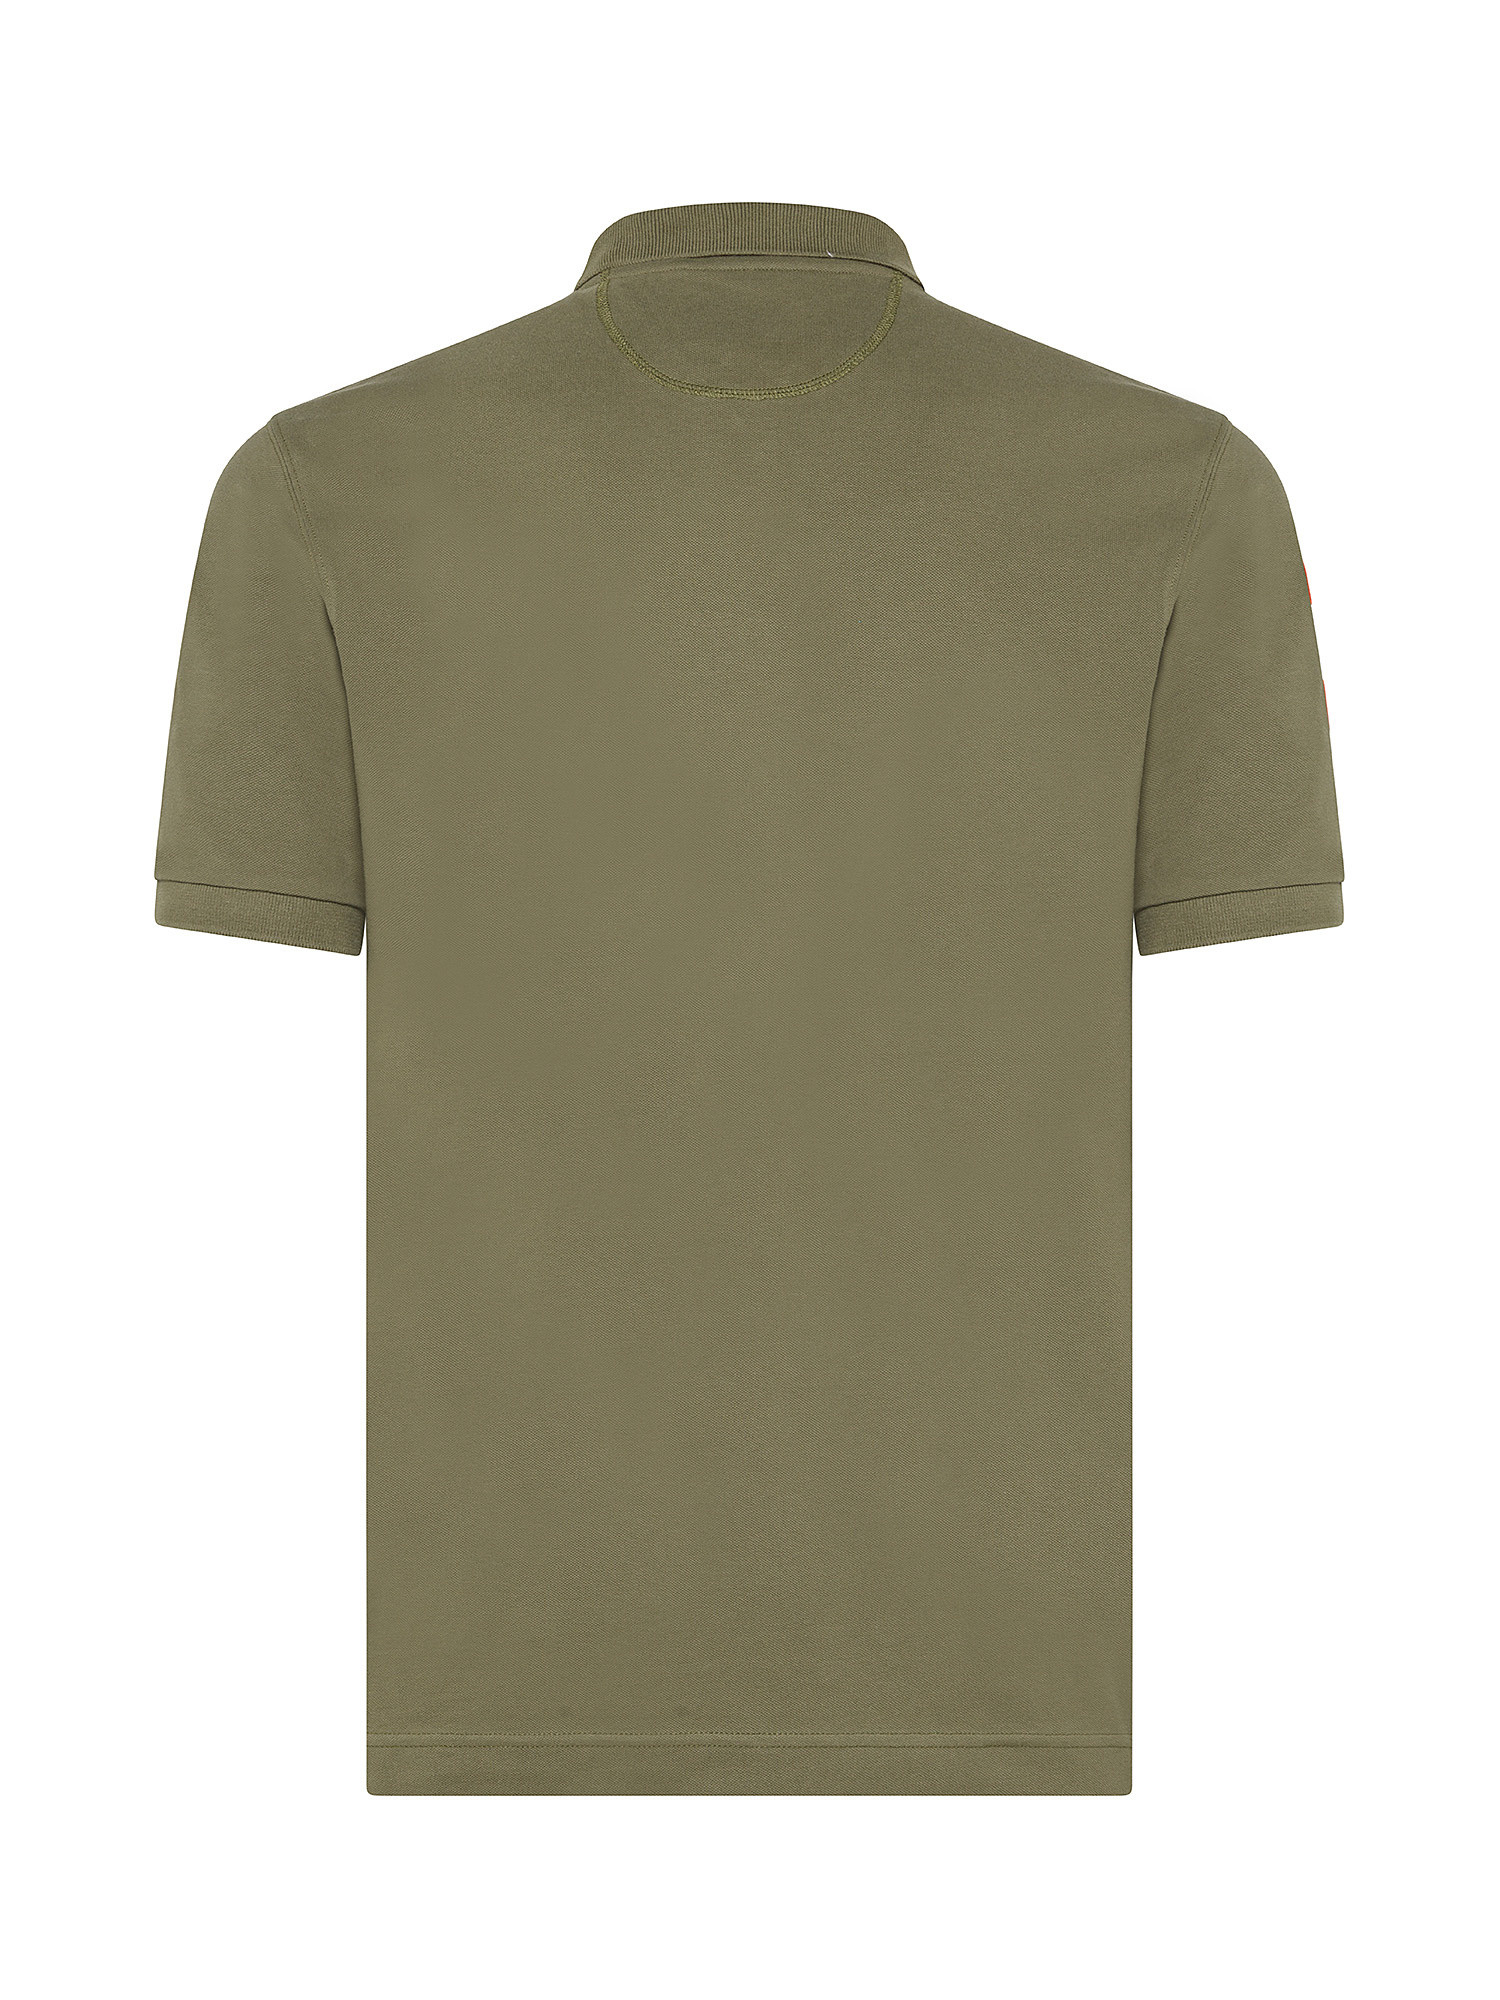 La Martina - Short-sleeved polo shirt in stretch piqué, Green, large image number 1